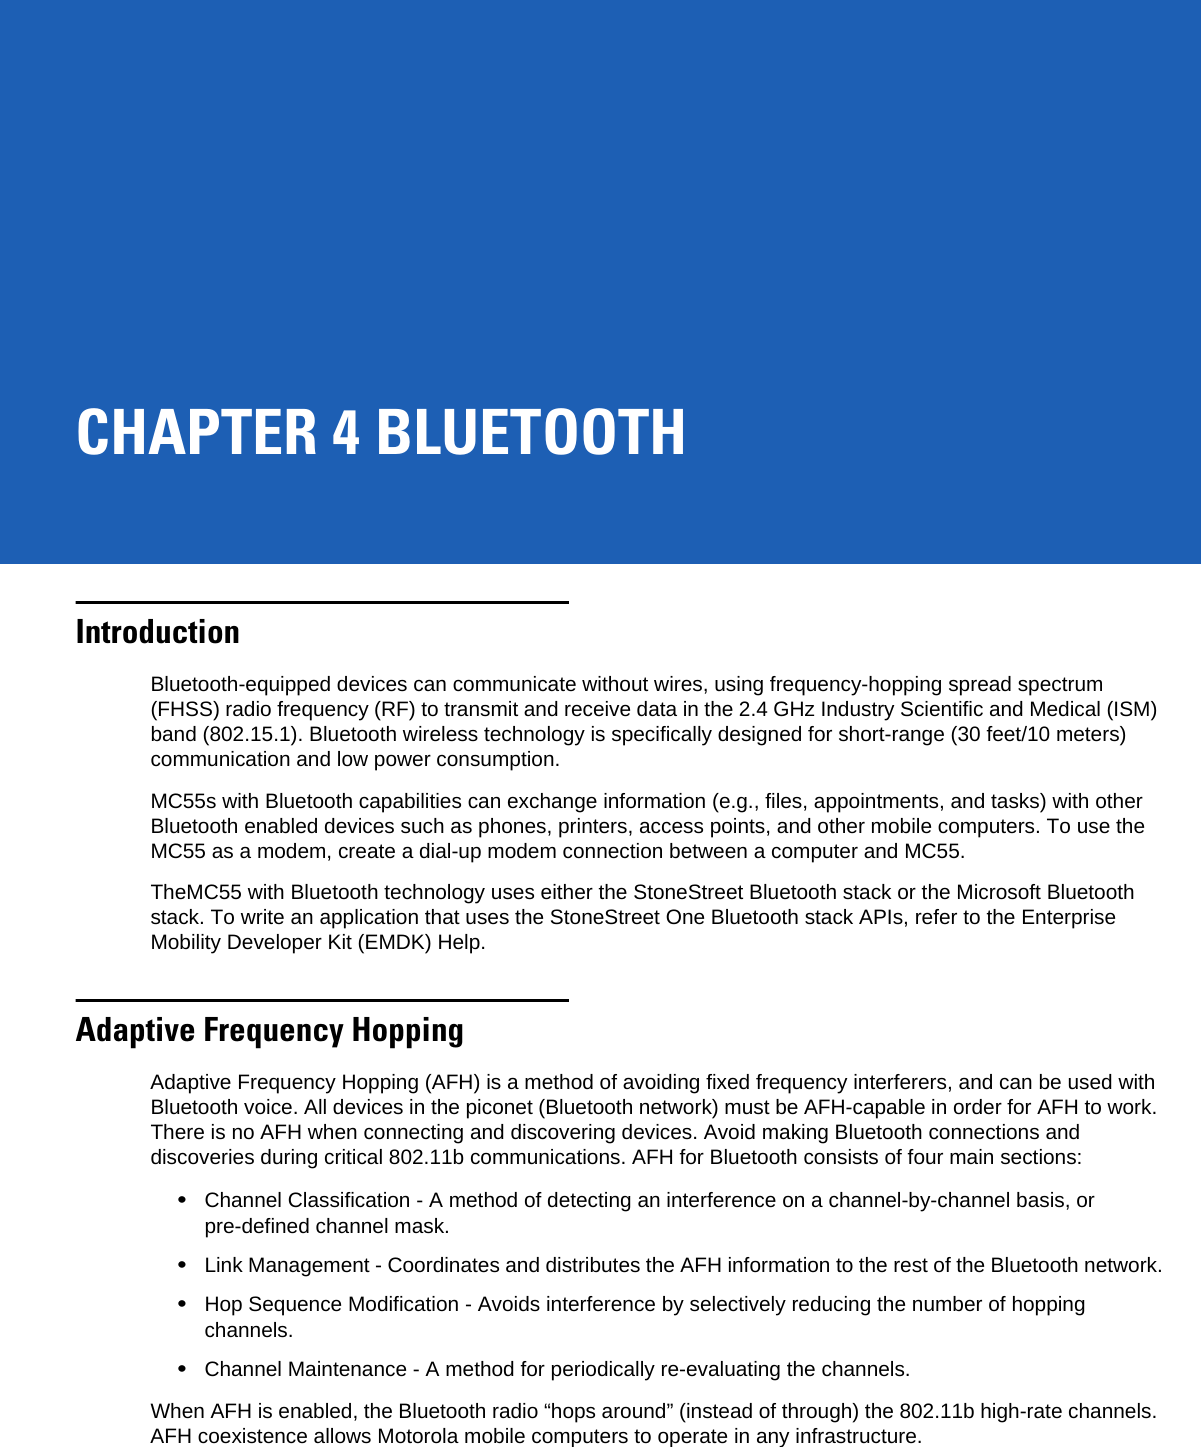 CHAPTER 4 BLUETOOTHIntroductionBluetooth-equipped devices can communicate without wires, using frequency-hopping spread spectrum (FHSS) radio frequency (RF) to transmit and receive data in the 2.4 GHz Industry Scientific and Medical (ISM) band (802.15.1). Bluetooth wireless technology is specifically designed for short-range (30 feet/10 meters) communication and low power consumption. MC55s with Bluetooth capabilities can exchange information (e.g., files, appointments, and tasks) with other Bluetooth enabled devices such as phones, printers, access points, and other mobile computers. To use the MC55 as a modem, create a dial-up modem connection between a computer and MC55.TheMC55 with Bluetooth technology uses either the StoneStreet Bluetooth stack or the Microsoft Bluetooth stack. To write an application that uses the StoneStreet One Bluetooth stack APIs, refer to the Enterprise Mobility Developer Kit (EMDK) Help.Adaptive Frequency HoppingAdaptive Frequency Hopping (AFH) is a method of avoiding fixed frequency interferers, and can be used with Bluetooth voice. All devices in the piconet (Bluetooth network) must be AFH-capable in order for AFH to work. There is no AFH when connecting and discovering devices. Avoid making Bluetooth connections and discoveries during critical 802.11b communications. AFH for Bluetooth consists of four main sections:•Channel Classification - A method of detecting an interference on a channel-by-channel basis, or pre-defined channel mask.•Link Management - Coordinates and distributes the AFH information to the rest of the Bluetooth network.•Hop Sequence Modification - Avoids interference by selectively reducing the number of hopping channels.•Channel Maintenance - A method for periodically re-evaluating the channels.When AFH is enabled, the Bluetooth radio “hops around” (instead of through) the 802.11b high-rate channels. AFH coexistence allows Motorola mobile computers to operate in any infrastructure. 